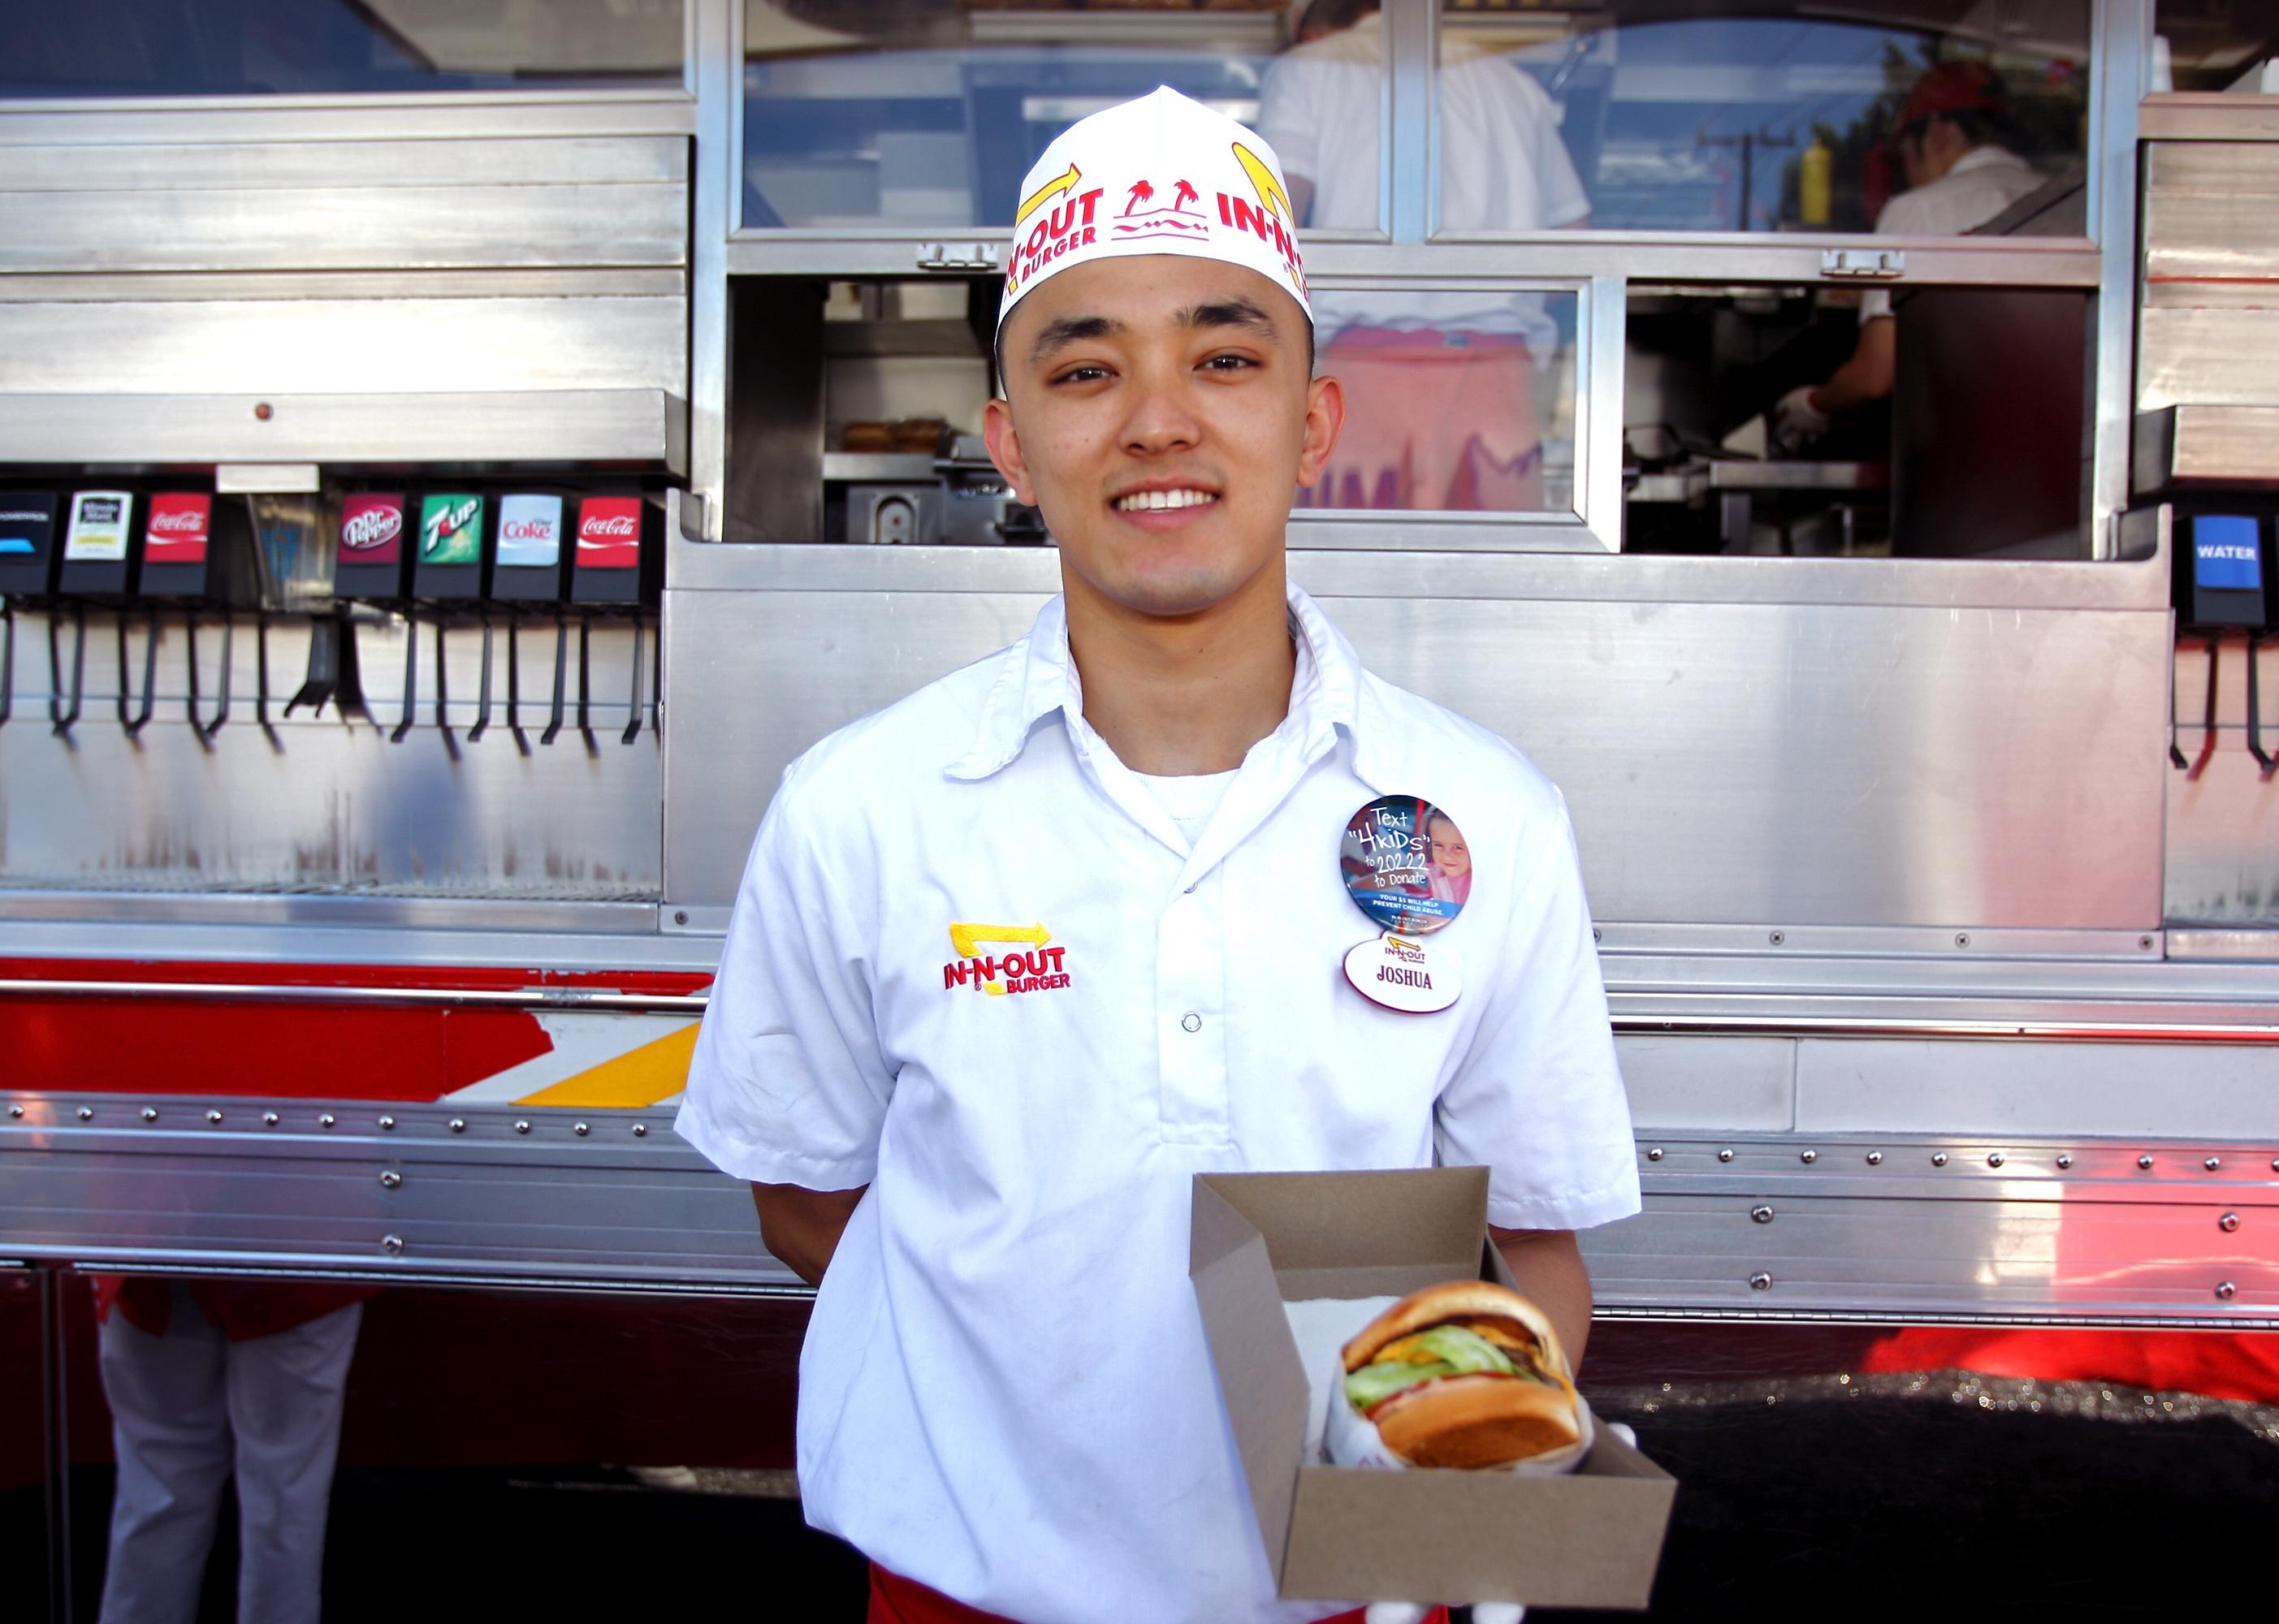 An In-N-Out Burger employee in a white shirt and hat holding a burger in a box.